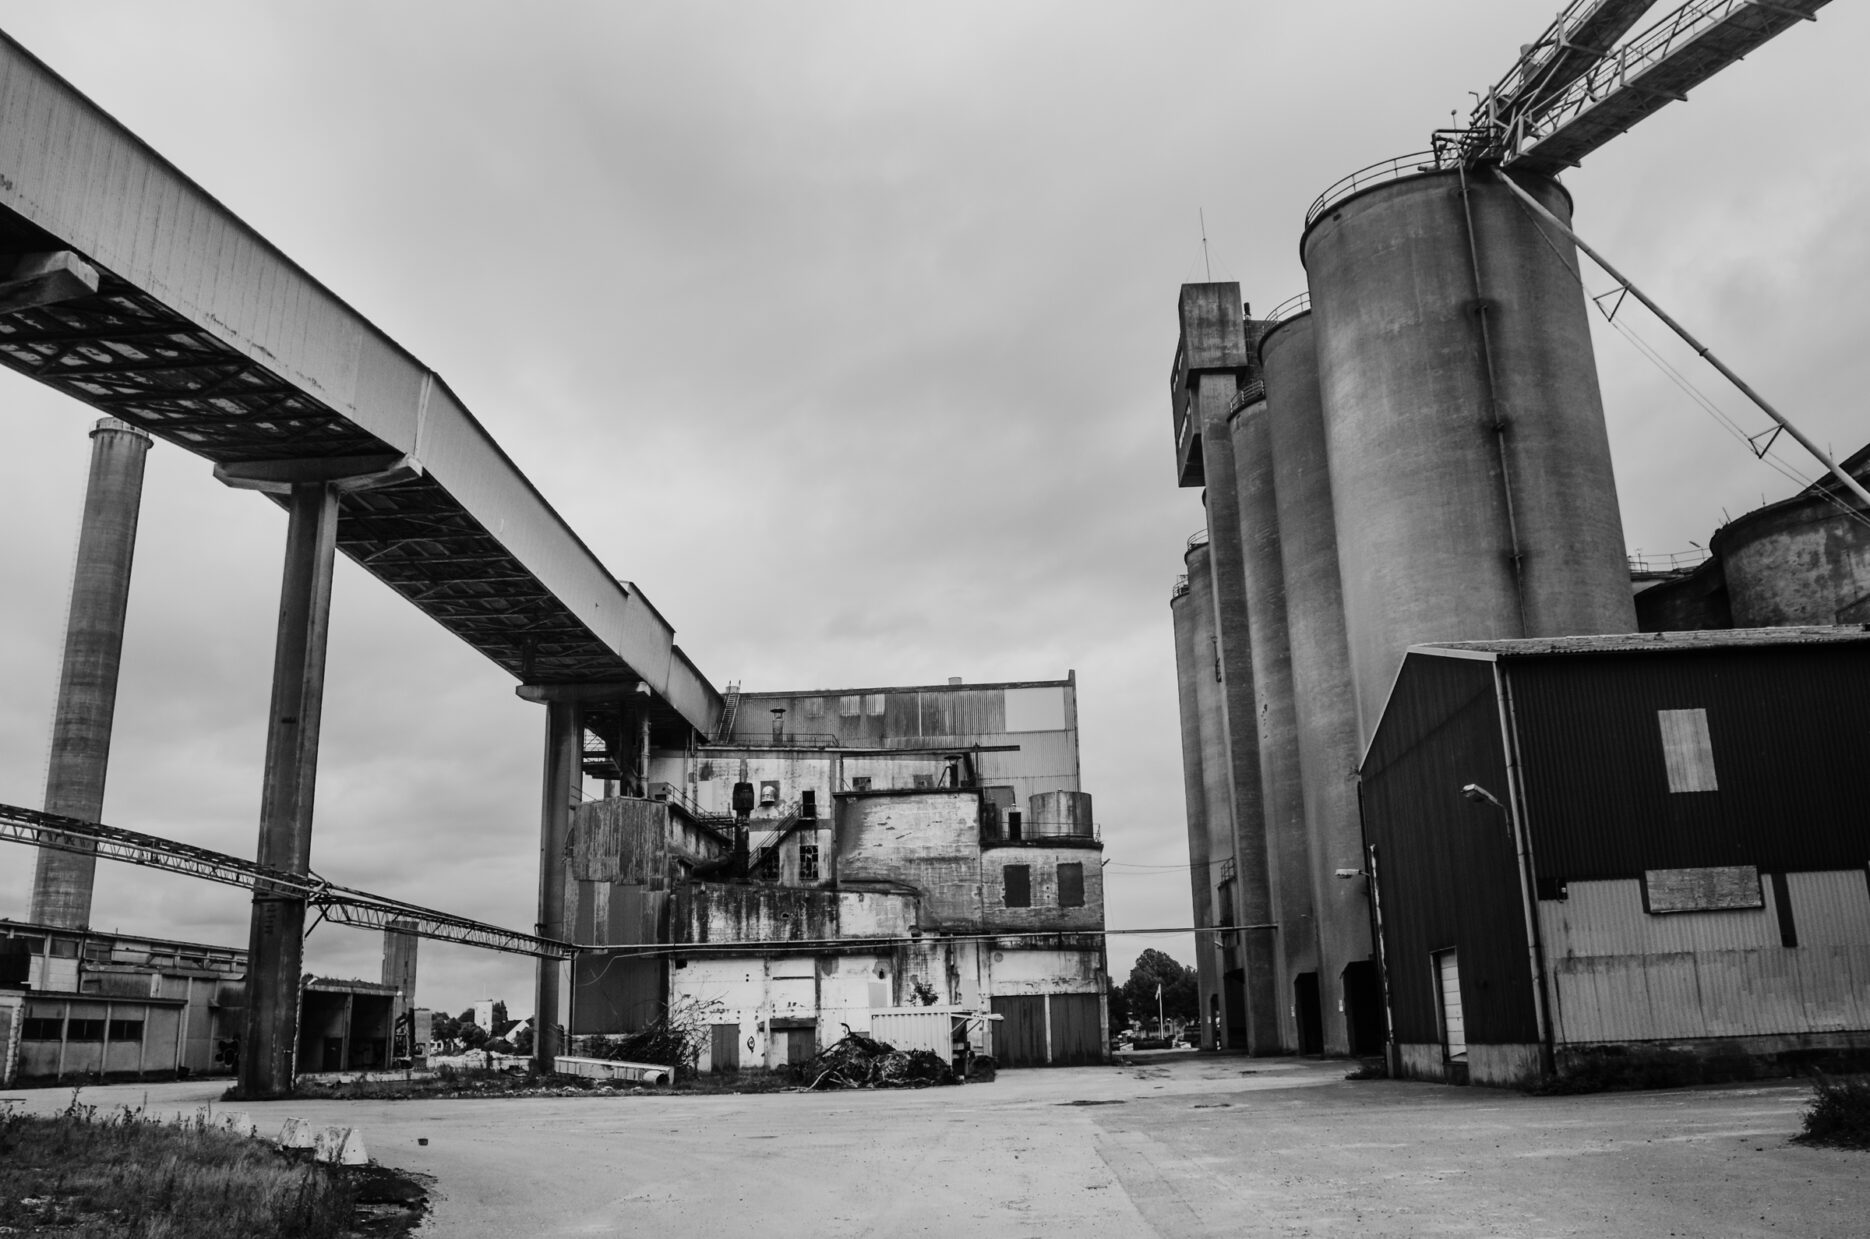 Old industrial buildings and a silo